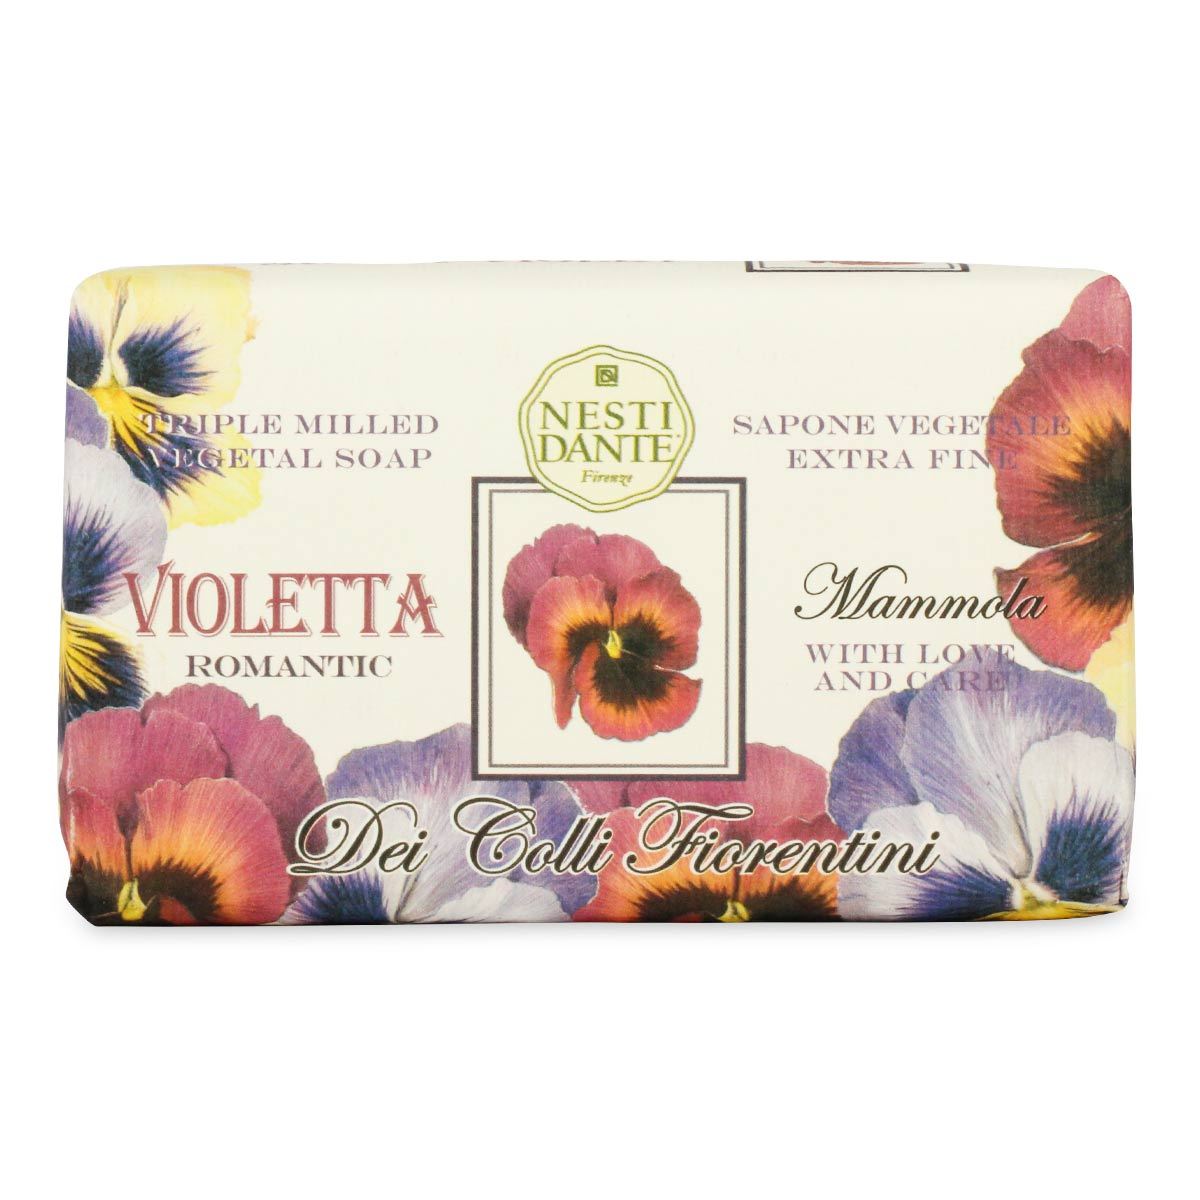 Primary image of Sweet Violet Soap